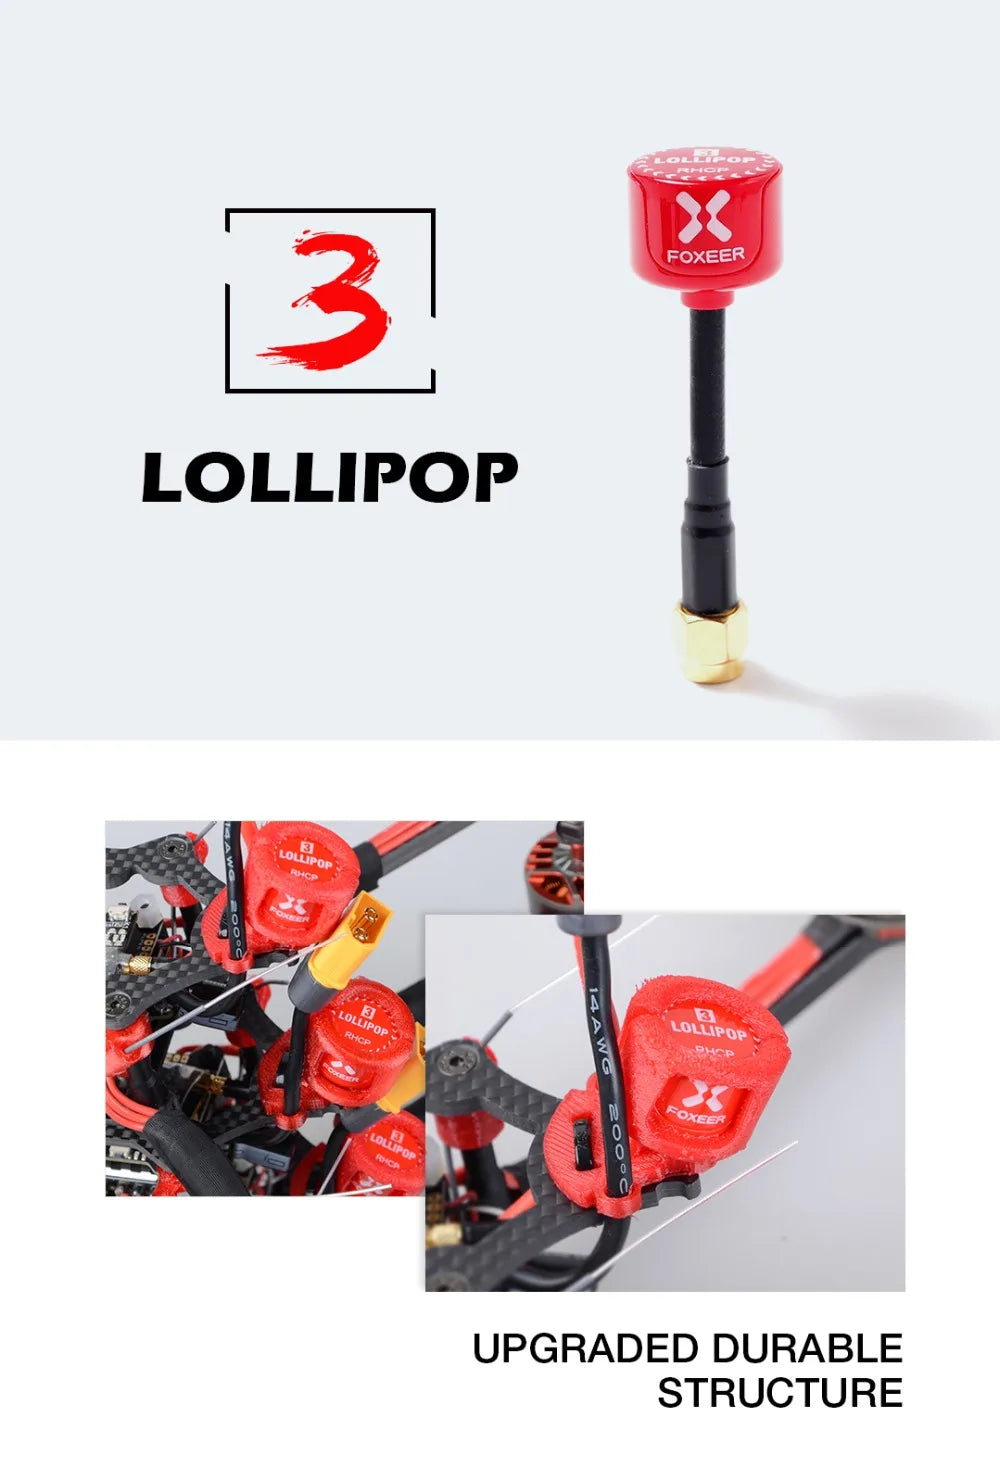 LOLLIPOP 0 UPGRADED DURABLE STRUCTURE Lol